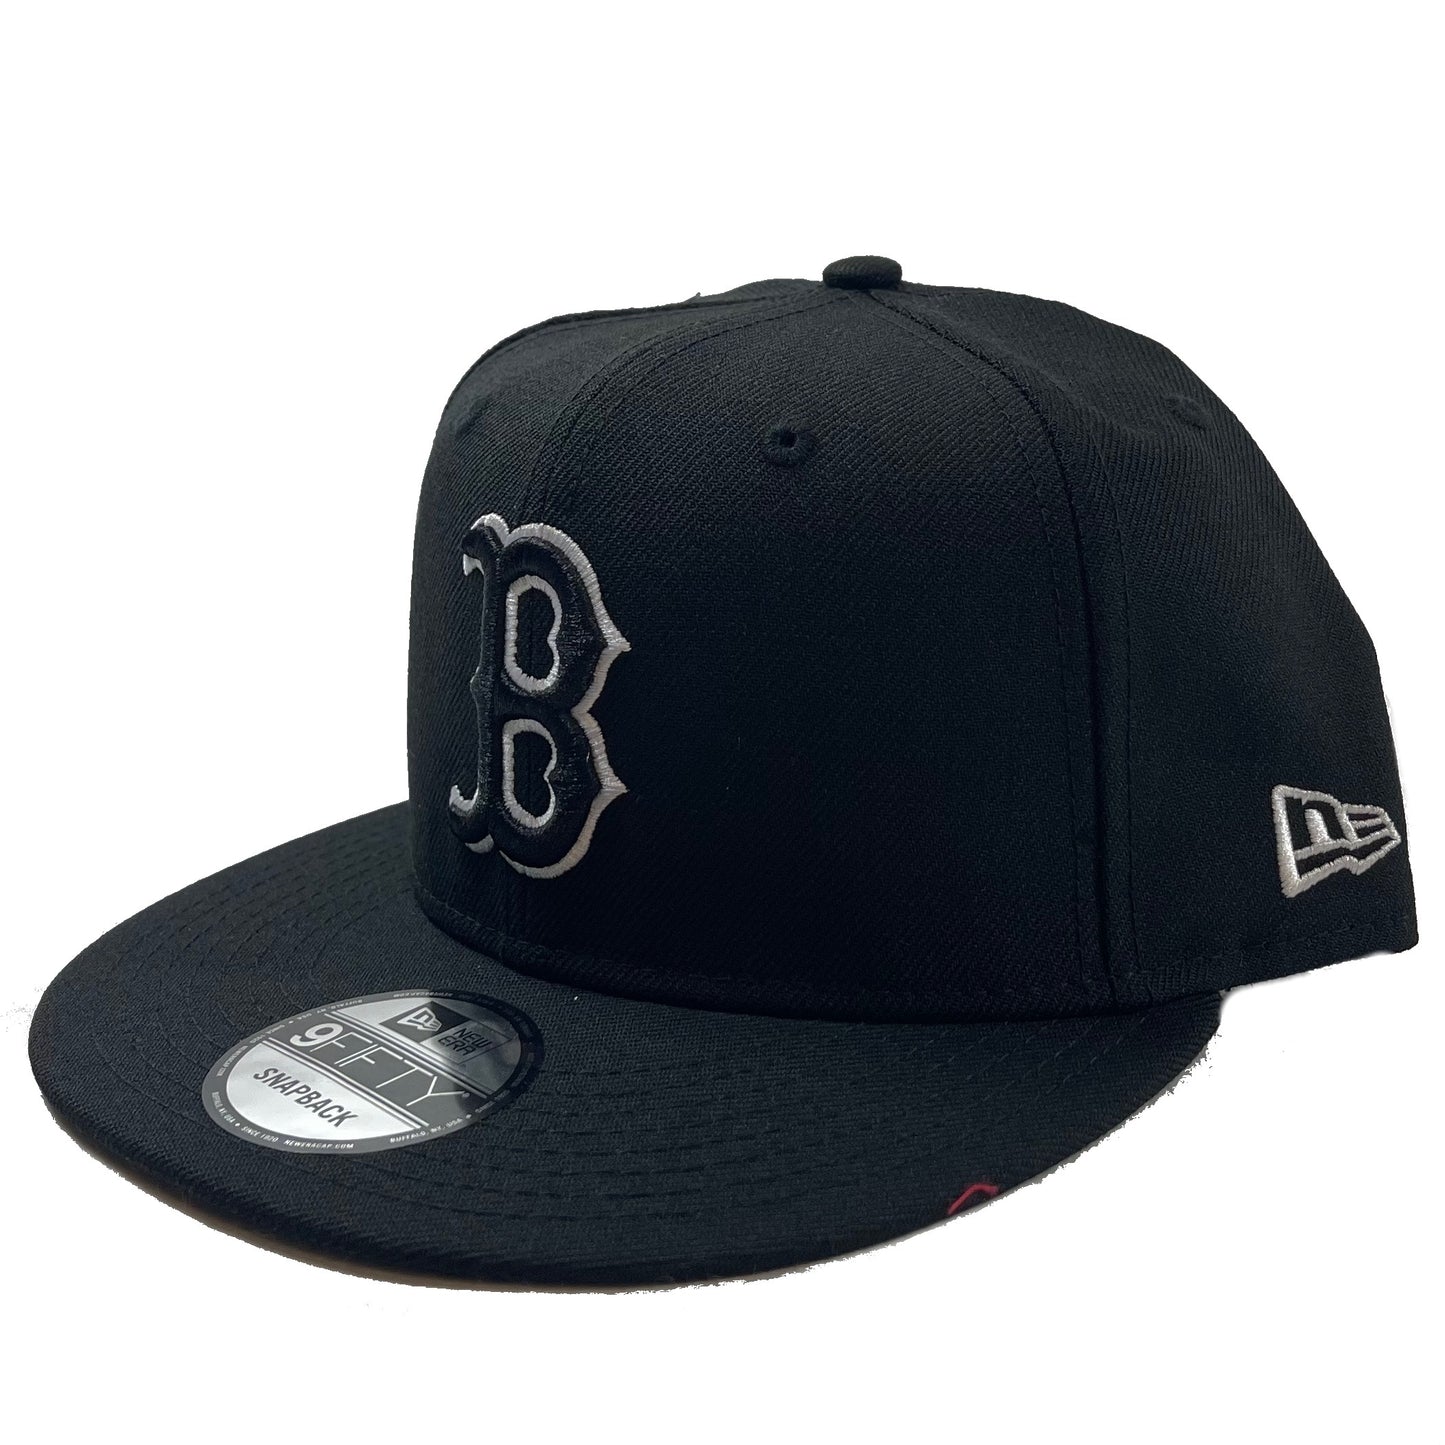 Boston Red Sox (Black) Snapback/Fitted